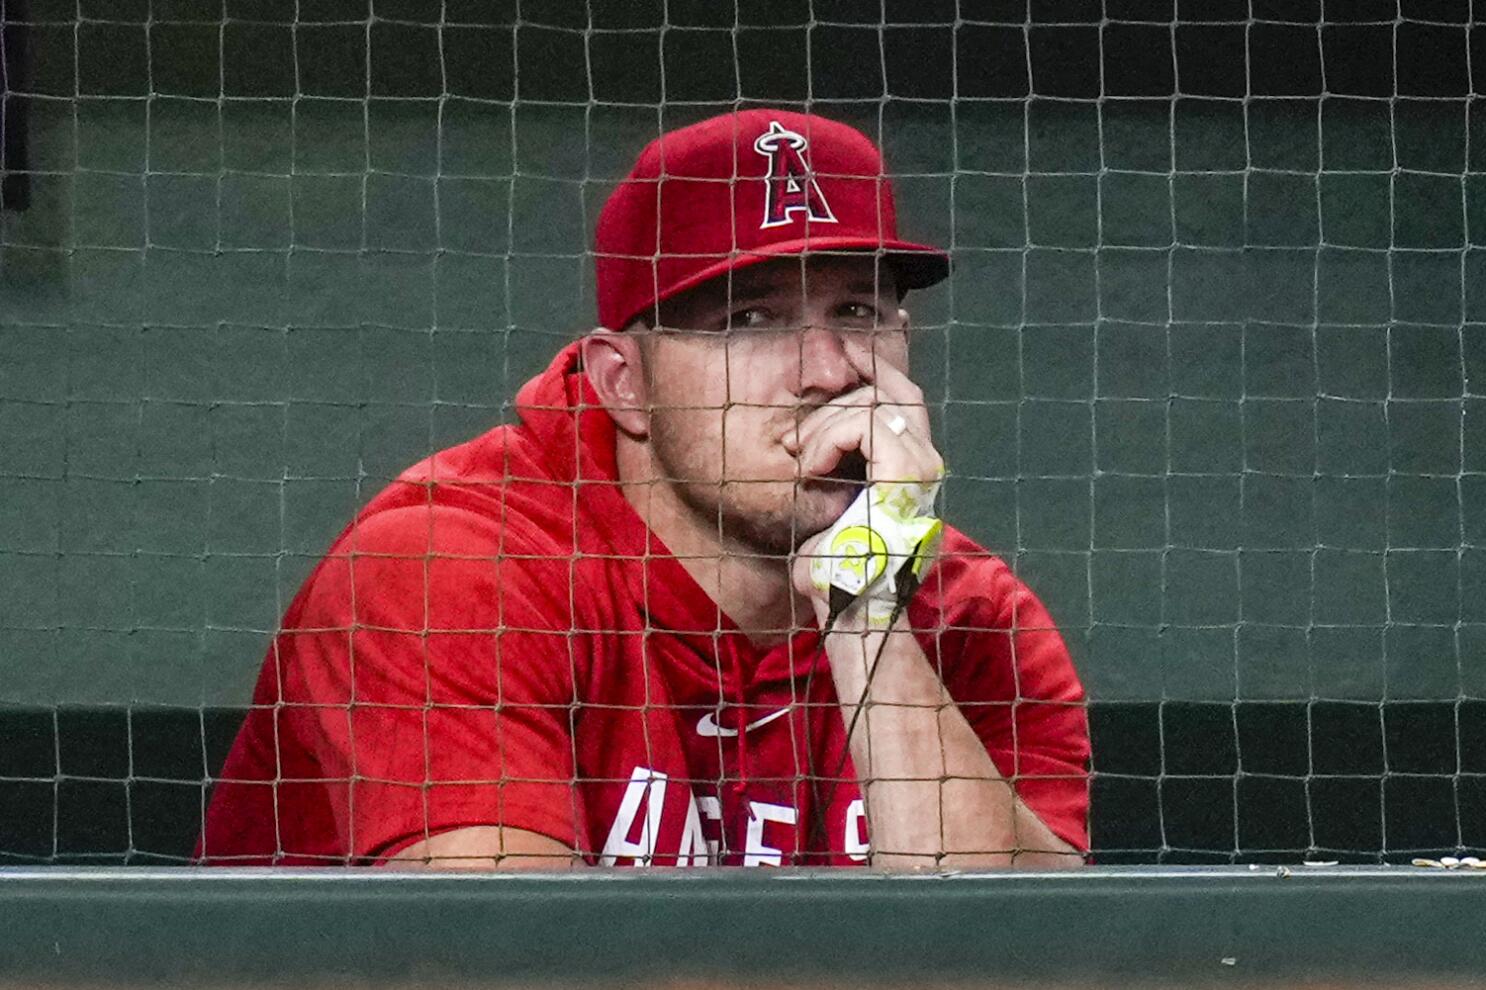 Mike Trout returns to the Angels' lineup after a 7-week absence with a  broken hand - The San Diego Union-Tribune